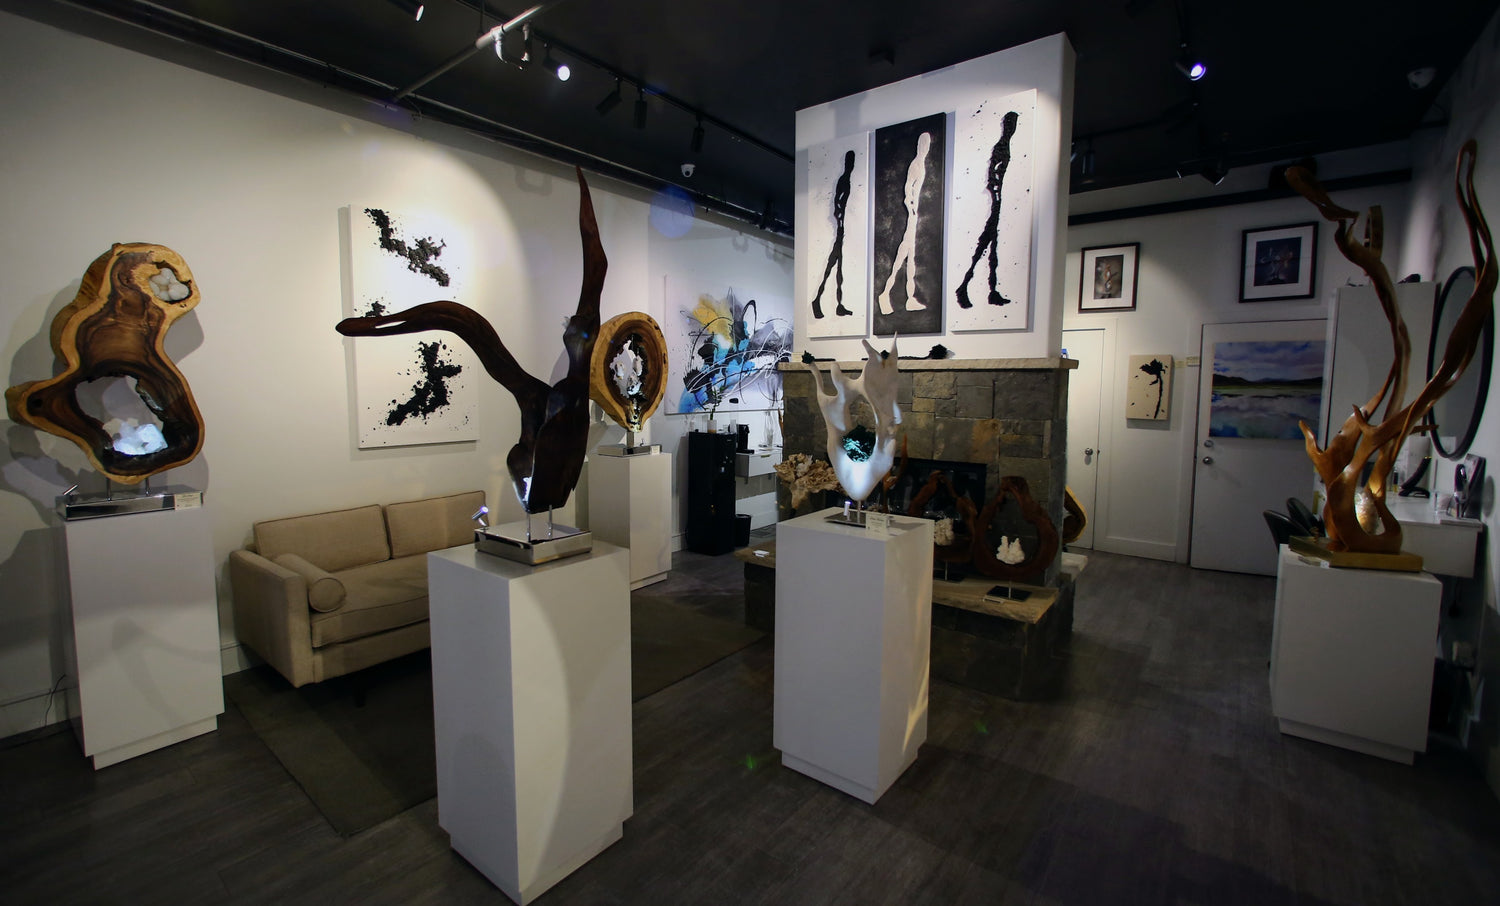 Inside of gallery with sculpture and paintings